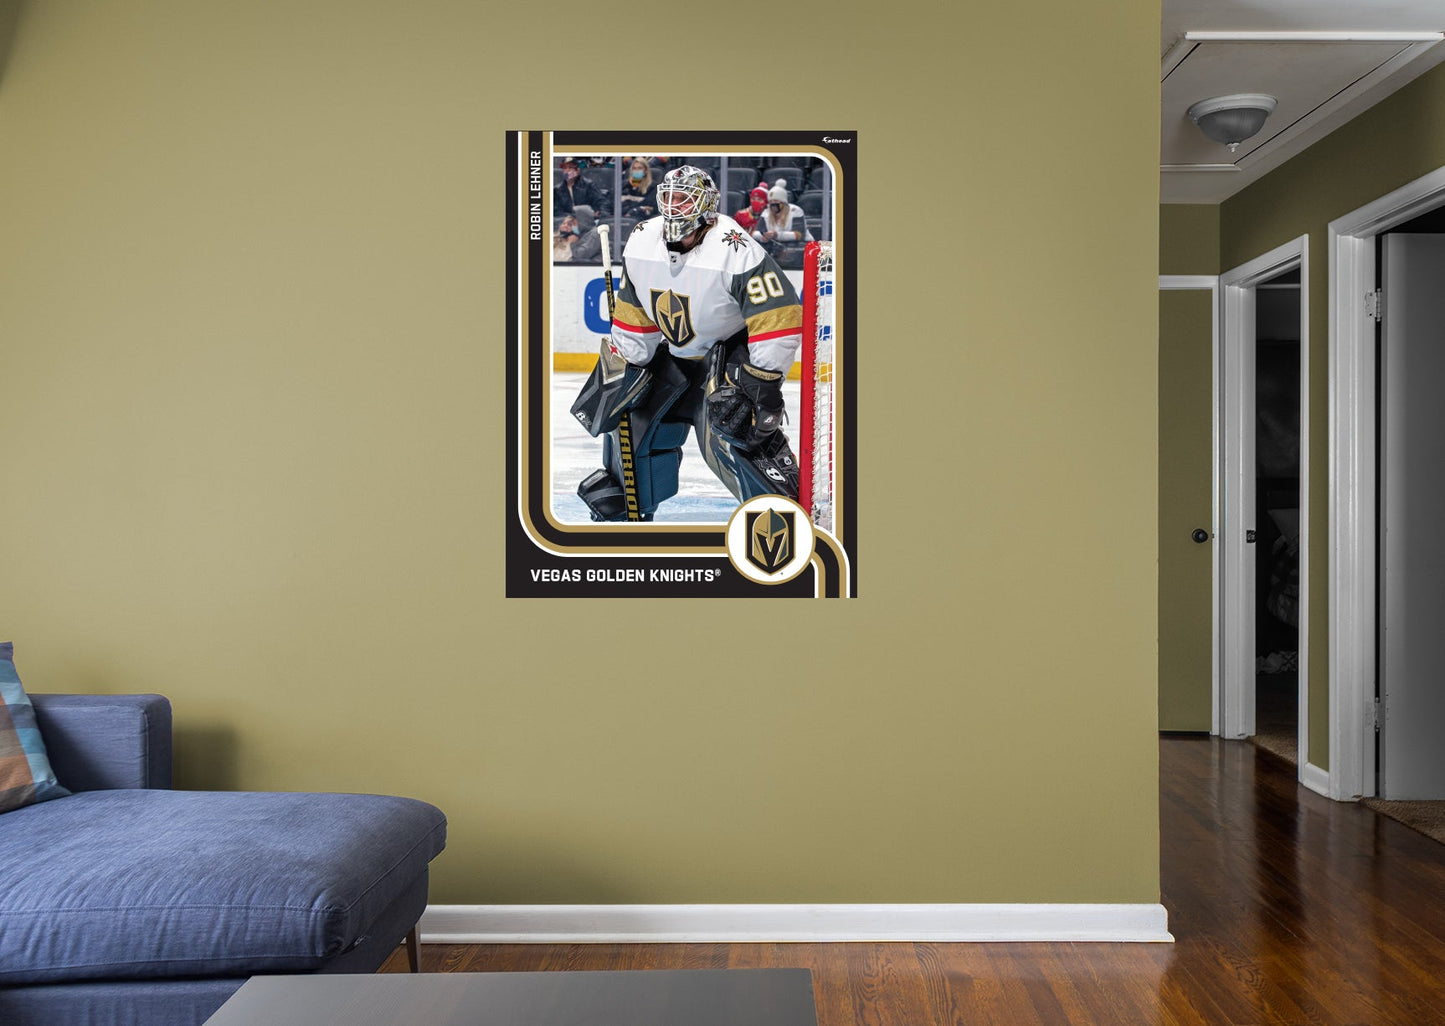 Vegas Golden Knights: Robin Lehner Poster - Officially Licensed NHL Removable Adhesive Decal